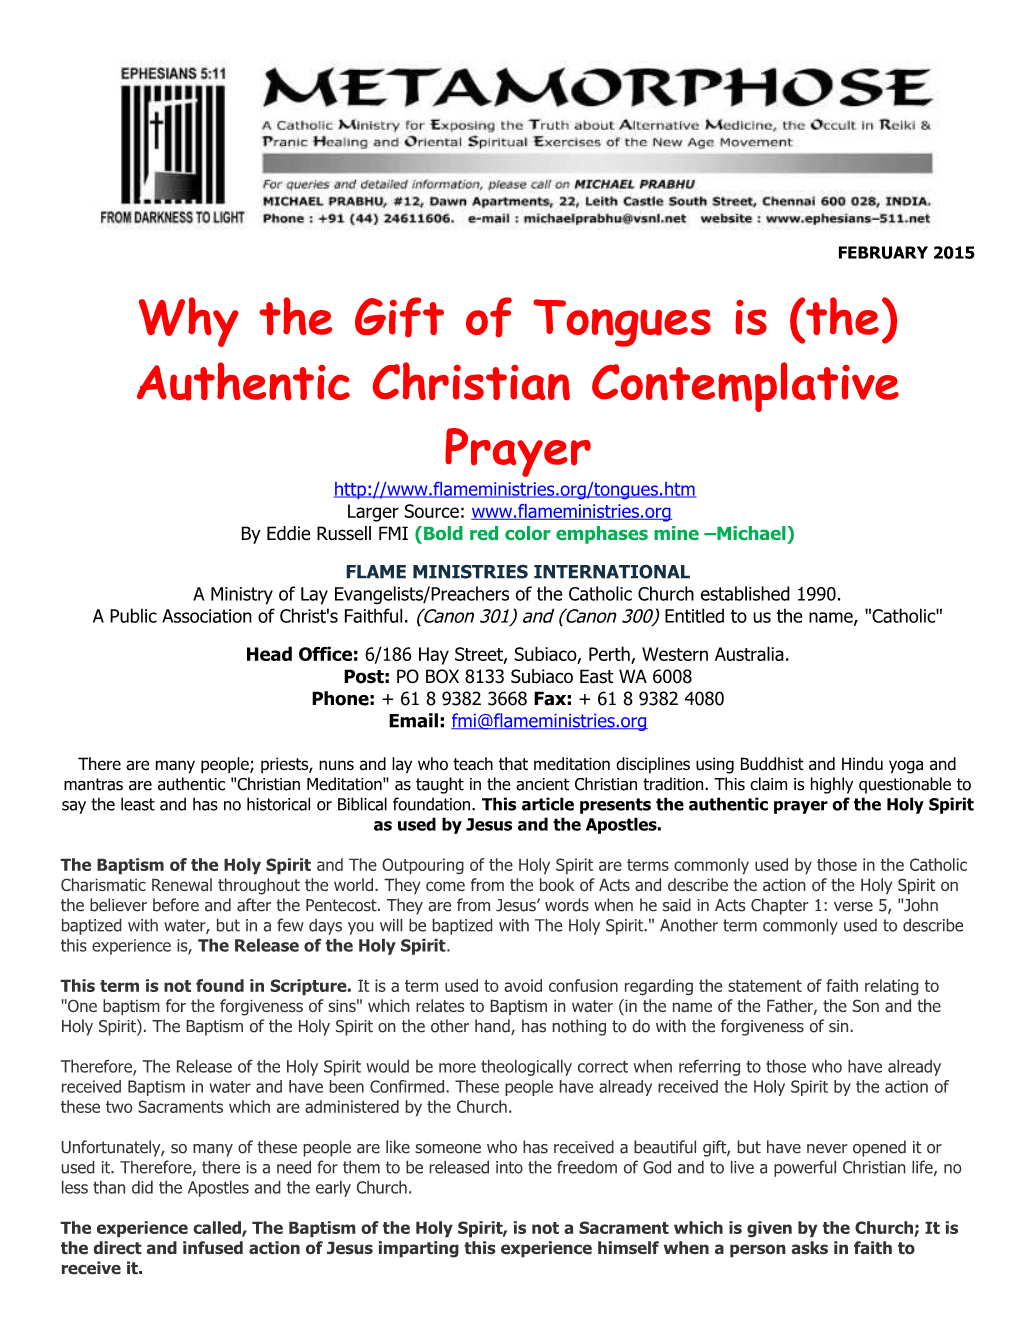 Why the Gift of Tongues Is (The) Authentic Christian Contemplative Prayer